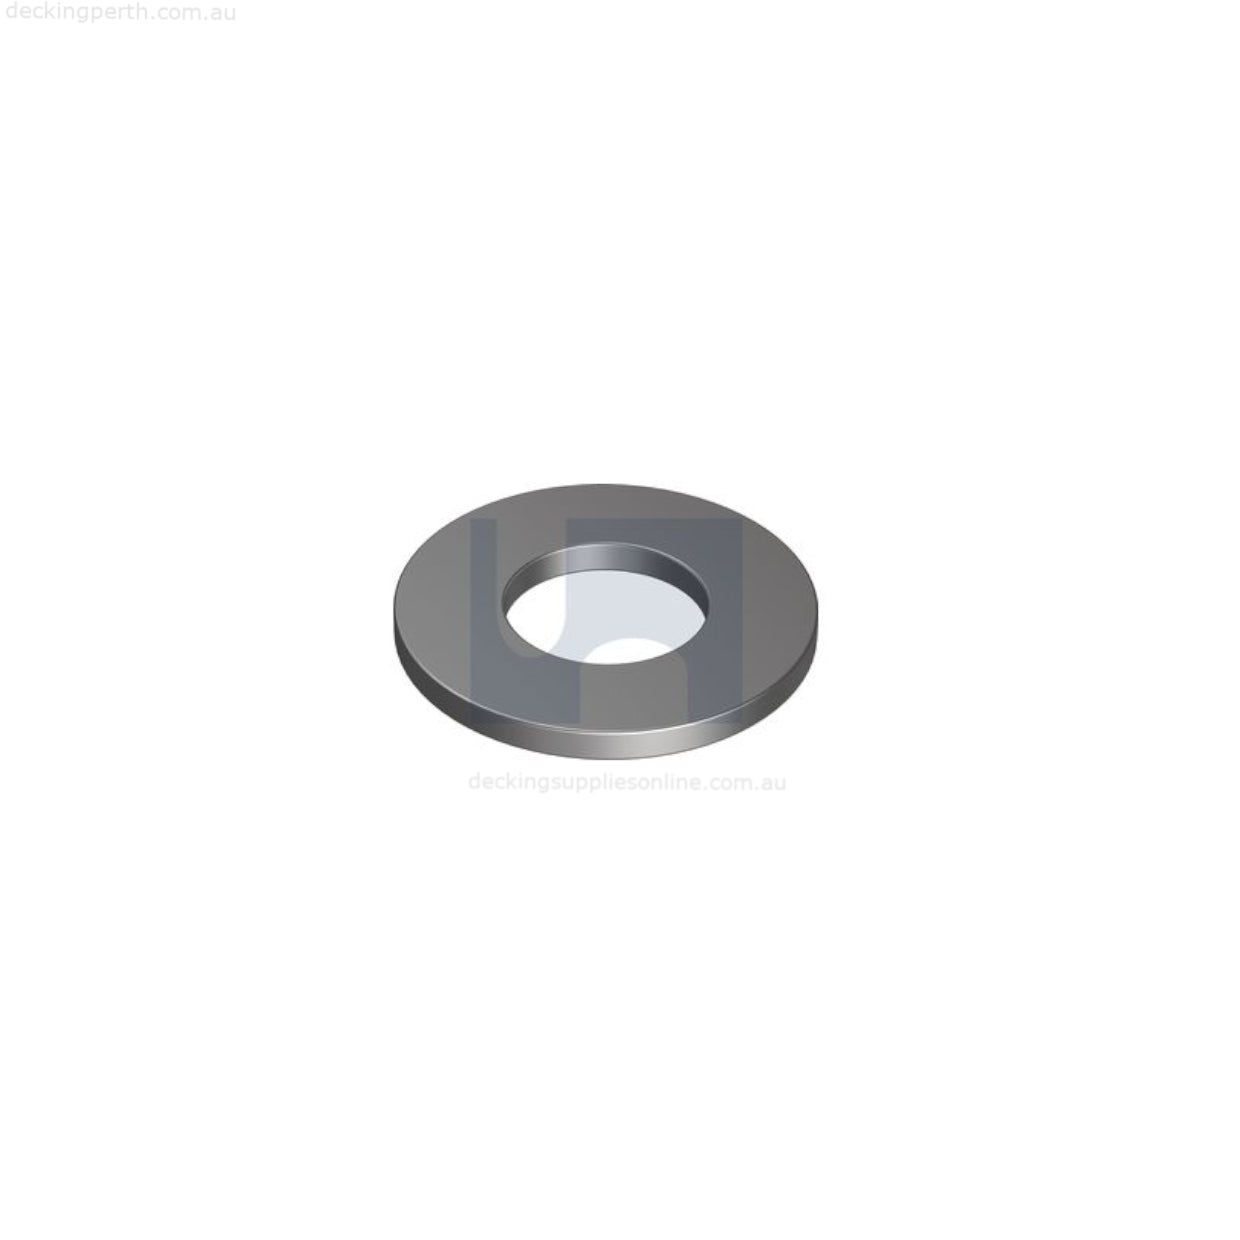    Hobson_Stainless_Steel_M8_x_19.5_Washers_Decking_Supplies_Online_1